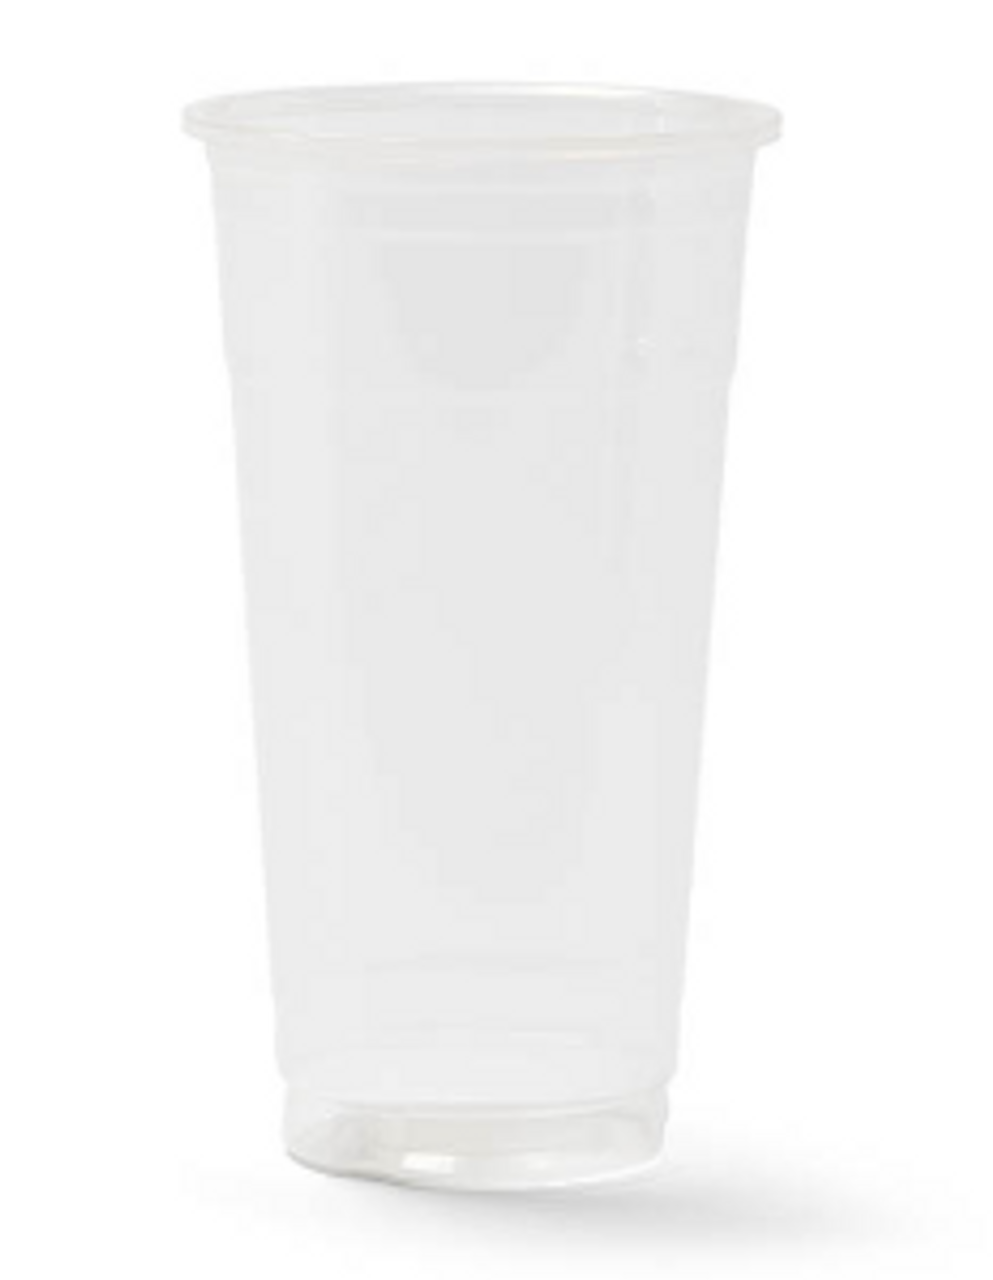 Best Cups for Cold Drinks - ePackageSupply